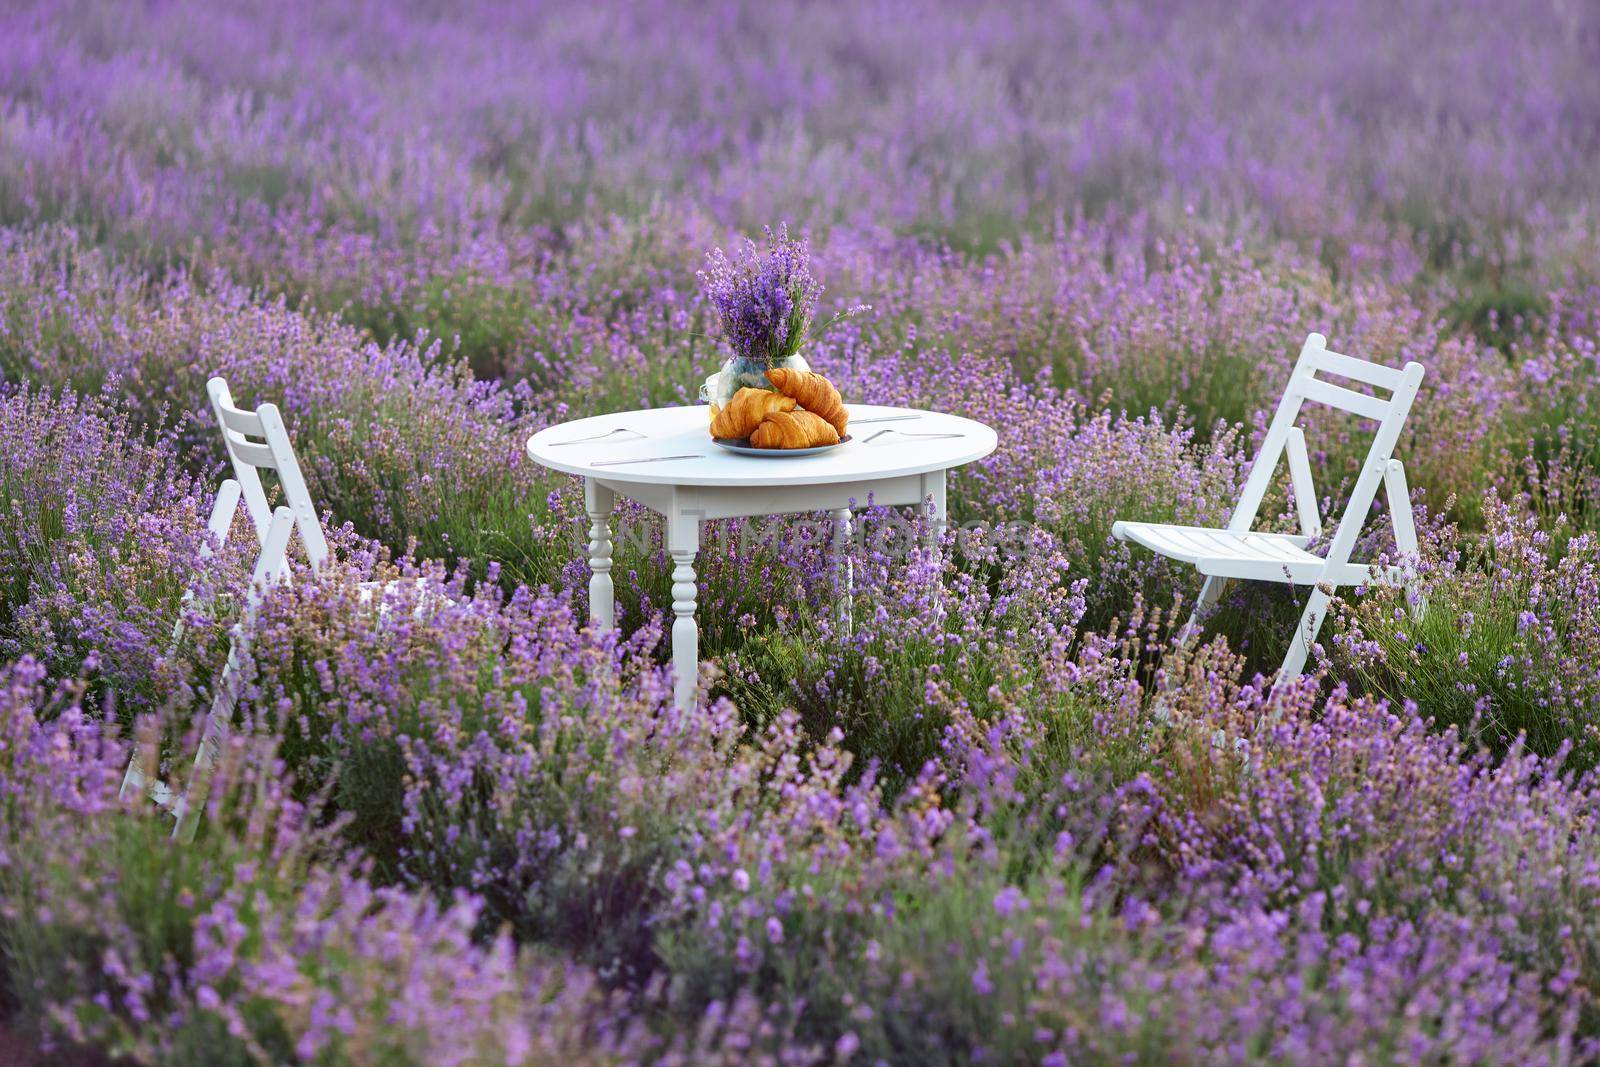 Beautiful decoration for date in lavender field full of blooming purple flowers. White wooden table and two chairs, decorated with fresh delicious croissants and glass vase with lavender bouquet.